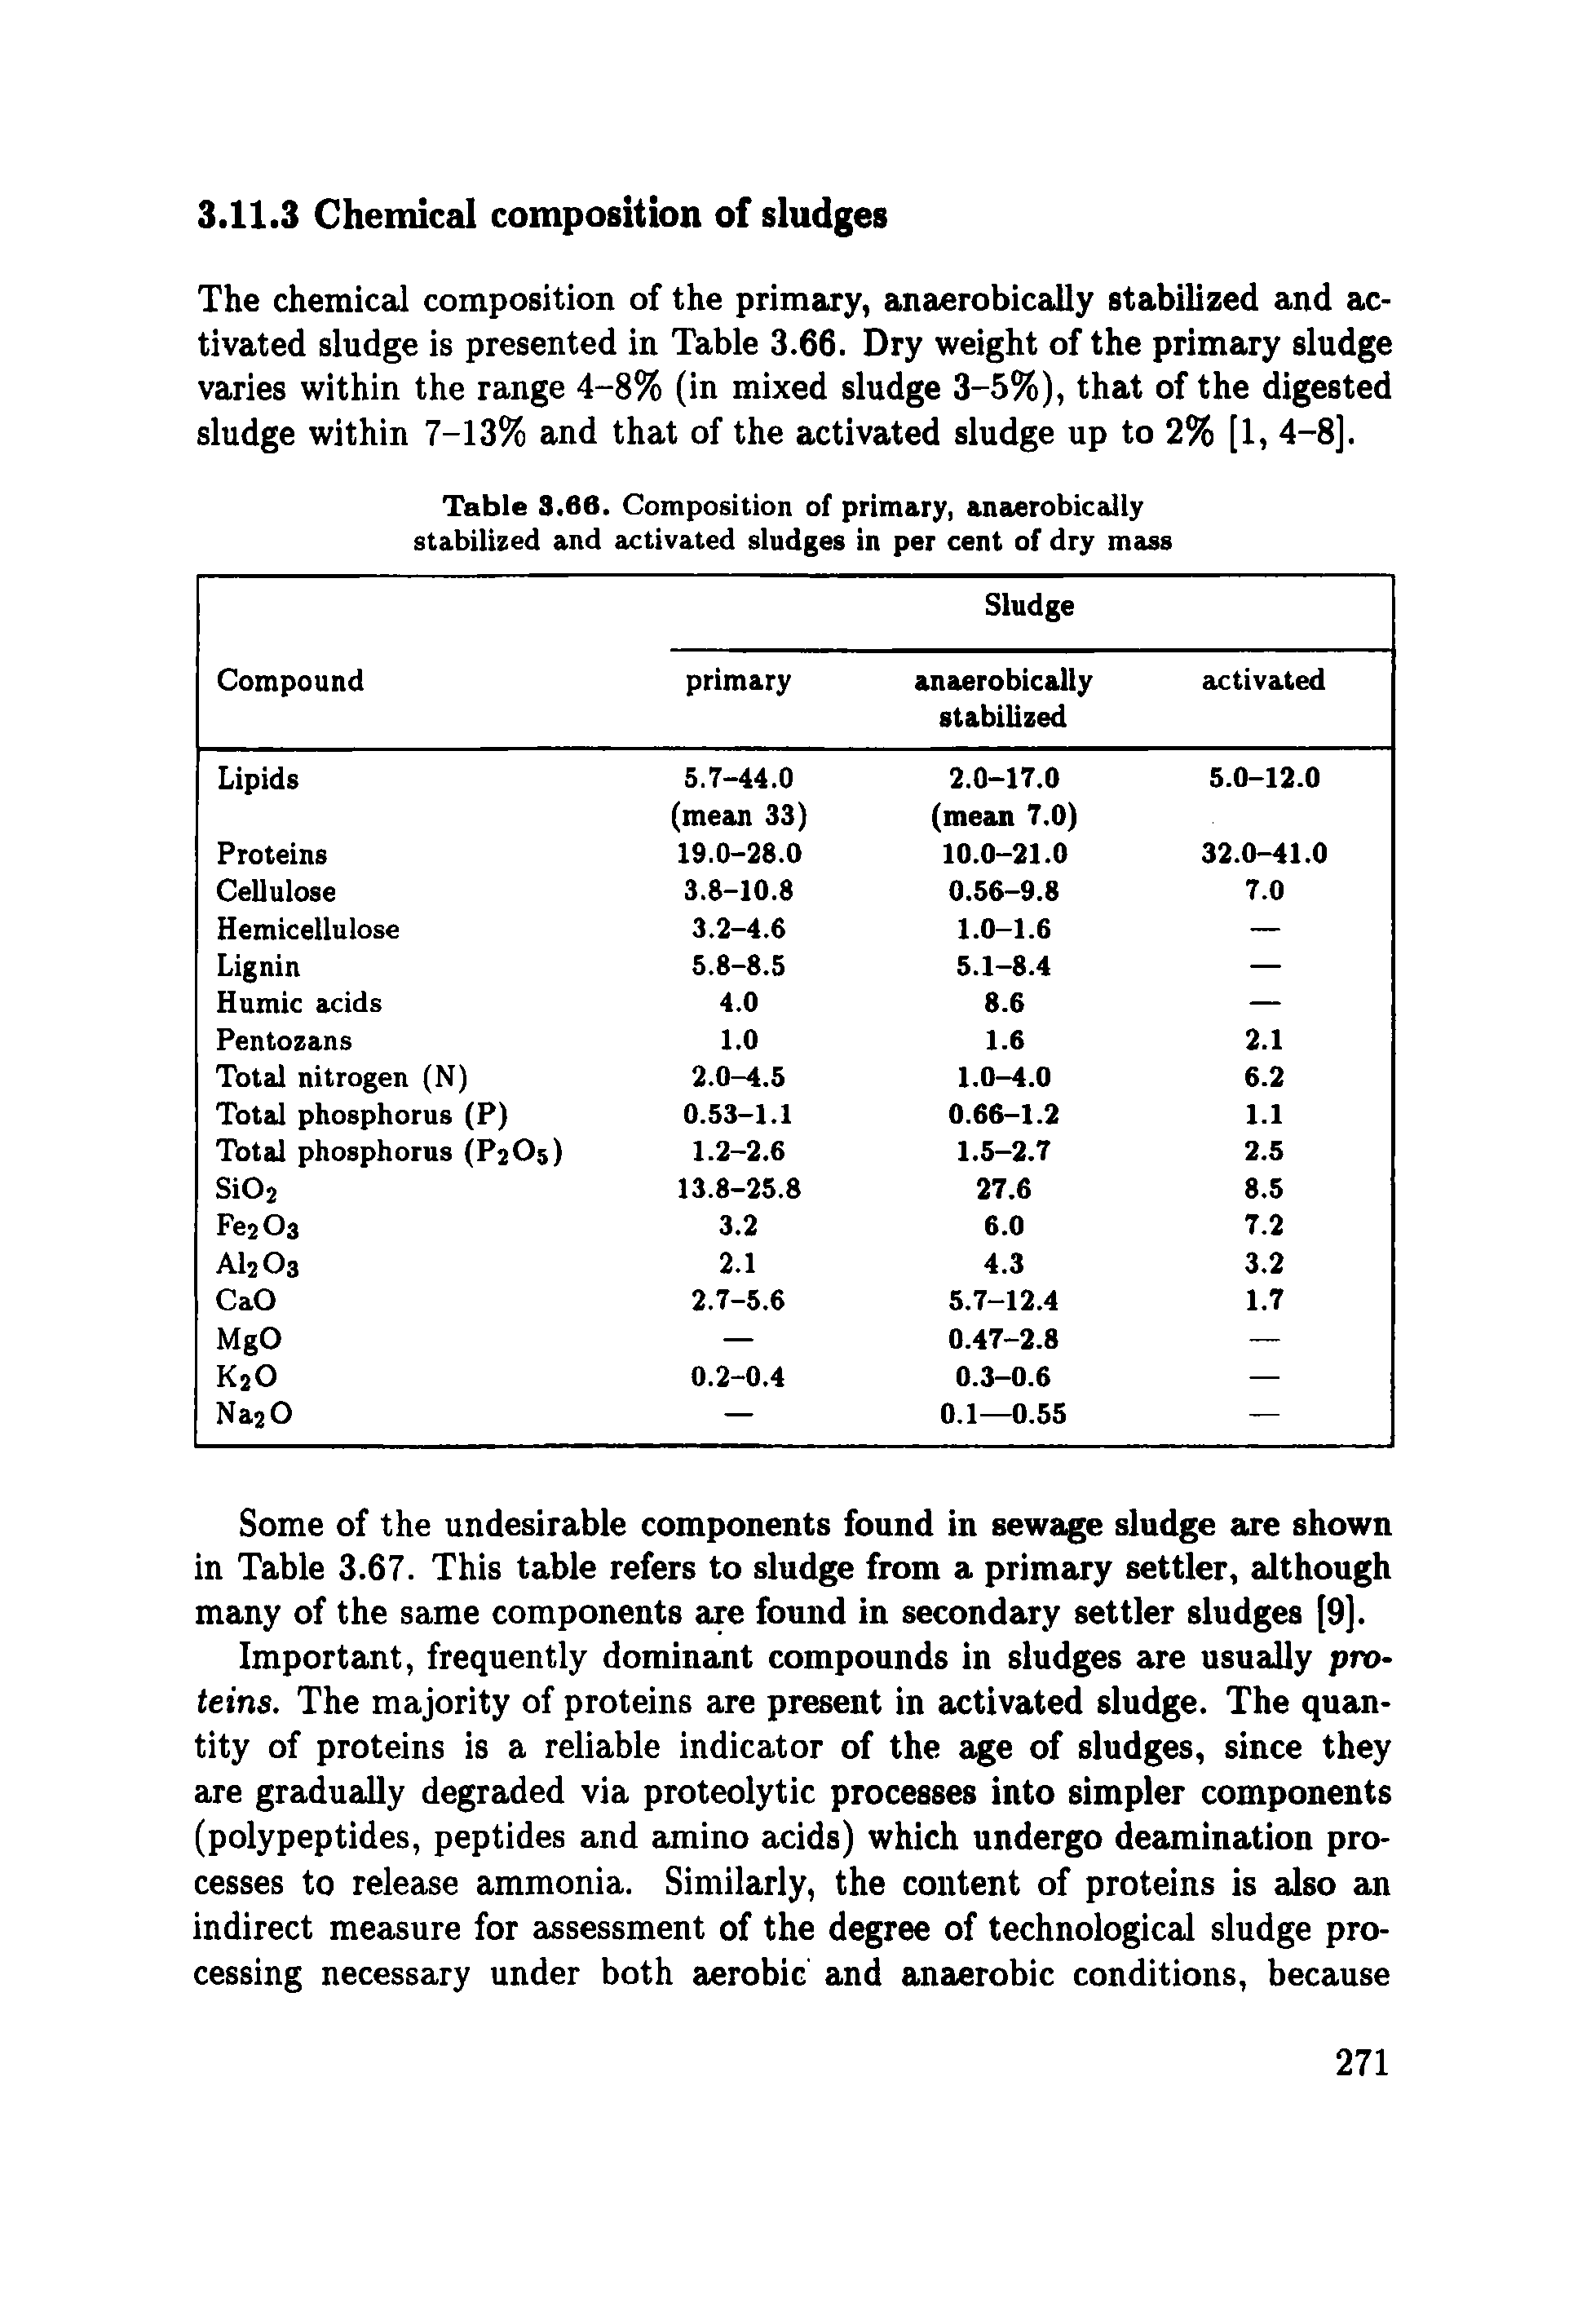 Table 3.66. Composition of primary, anaerobically stabilized and activated sludges in per cent of dry mass...